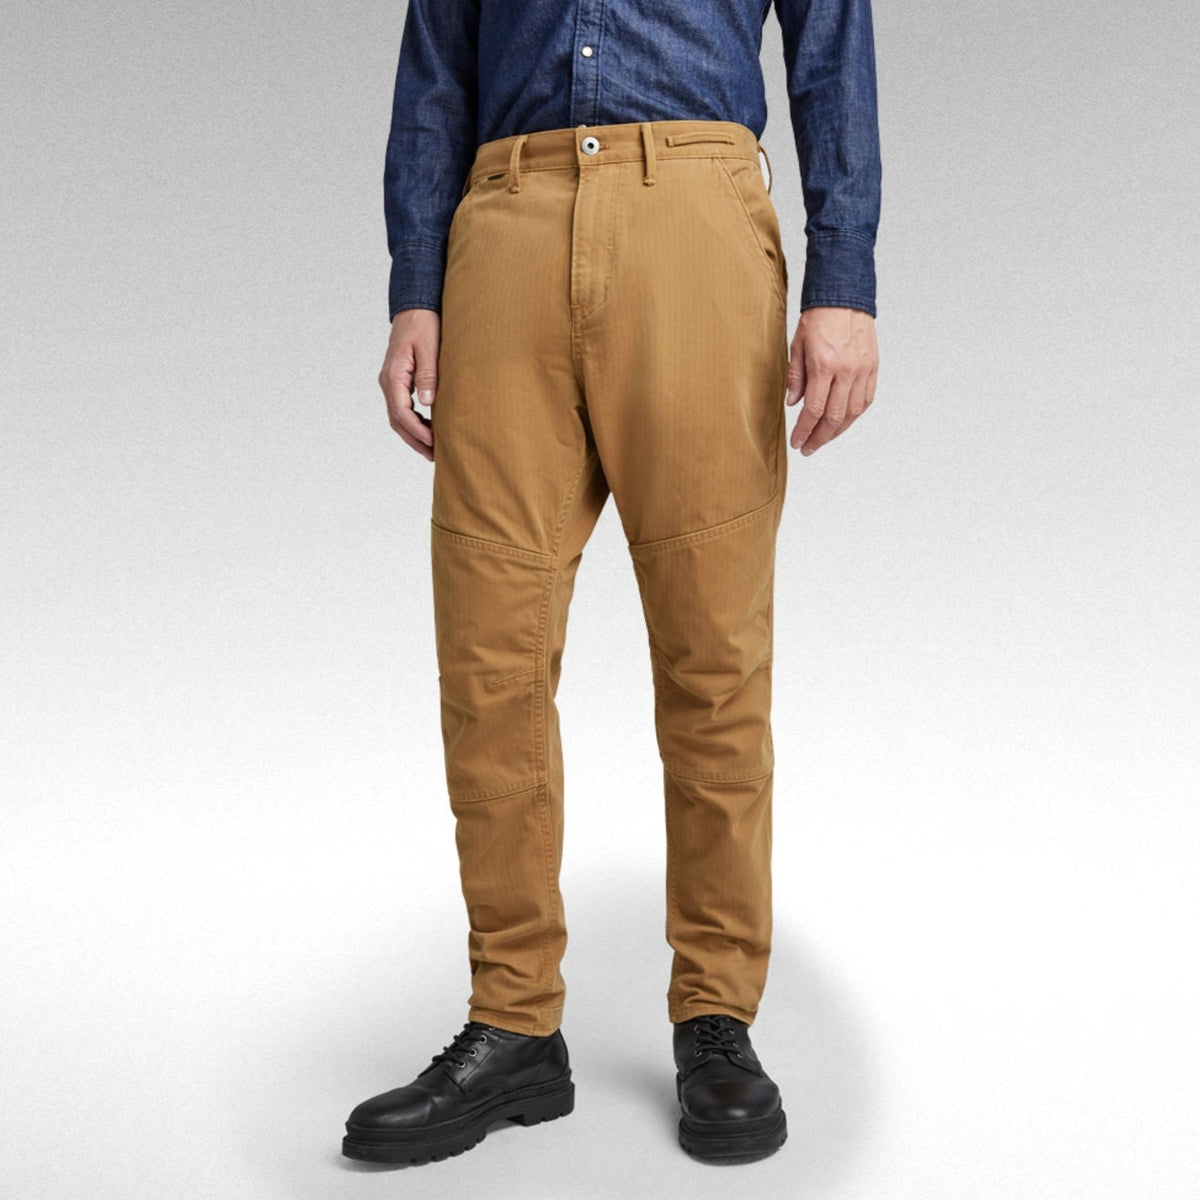 G Star Raw Rovic Tapered Cargo Trousers | Mainline Menswear United States